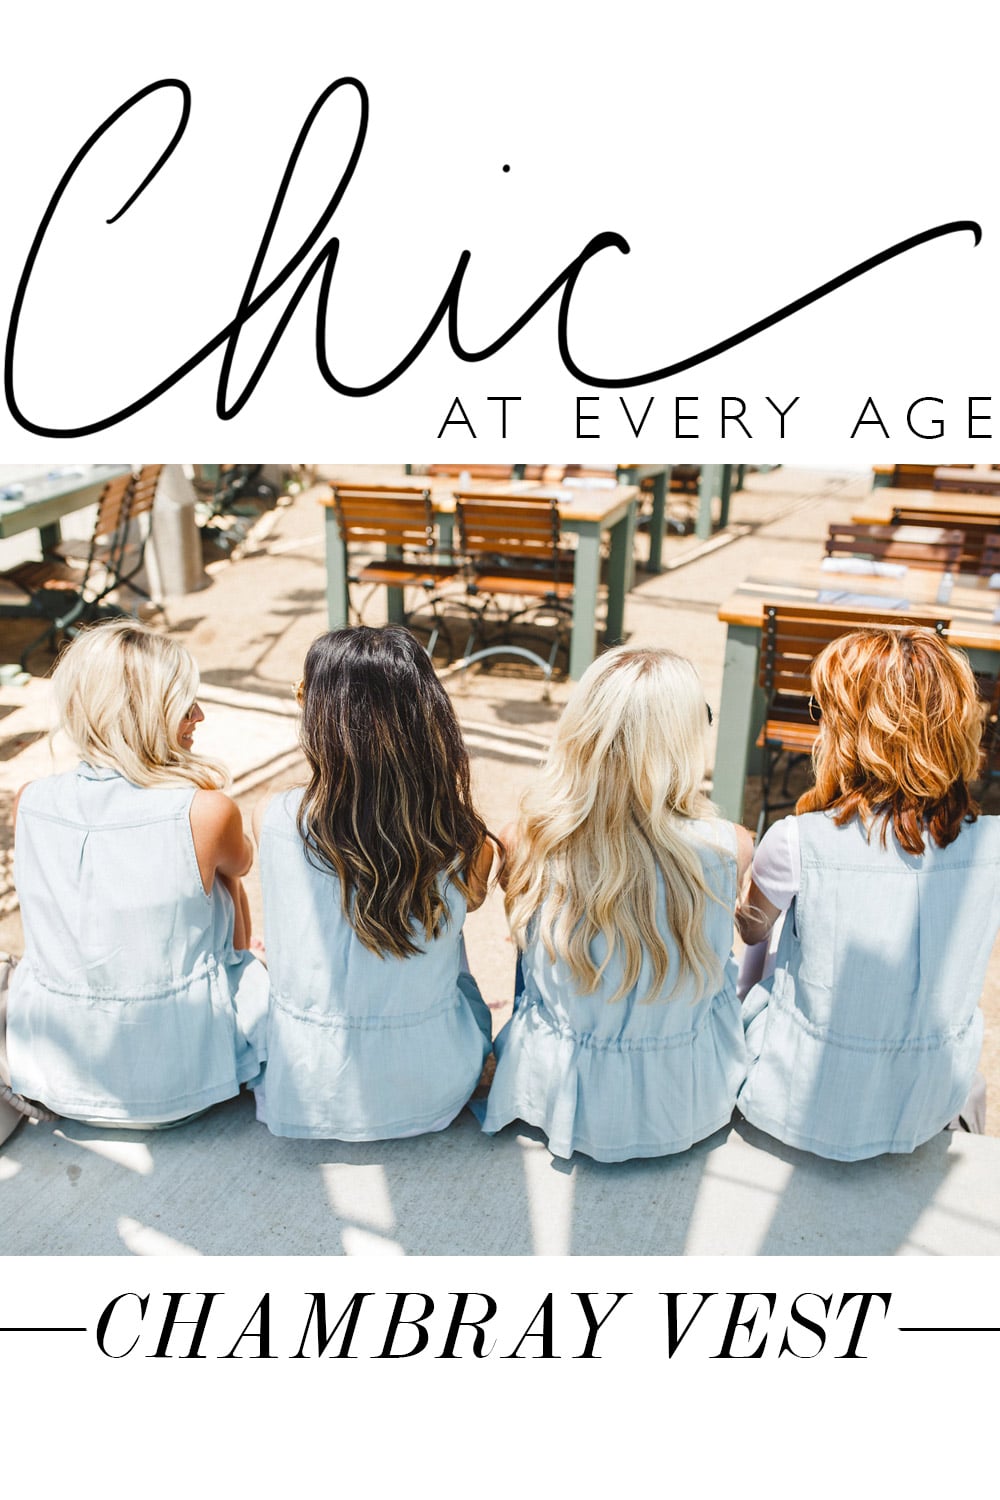 chic at every age, blonde brunette redhead in chambray vest